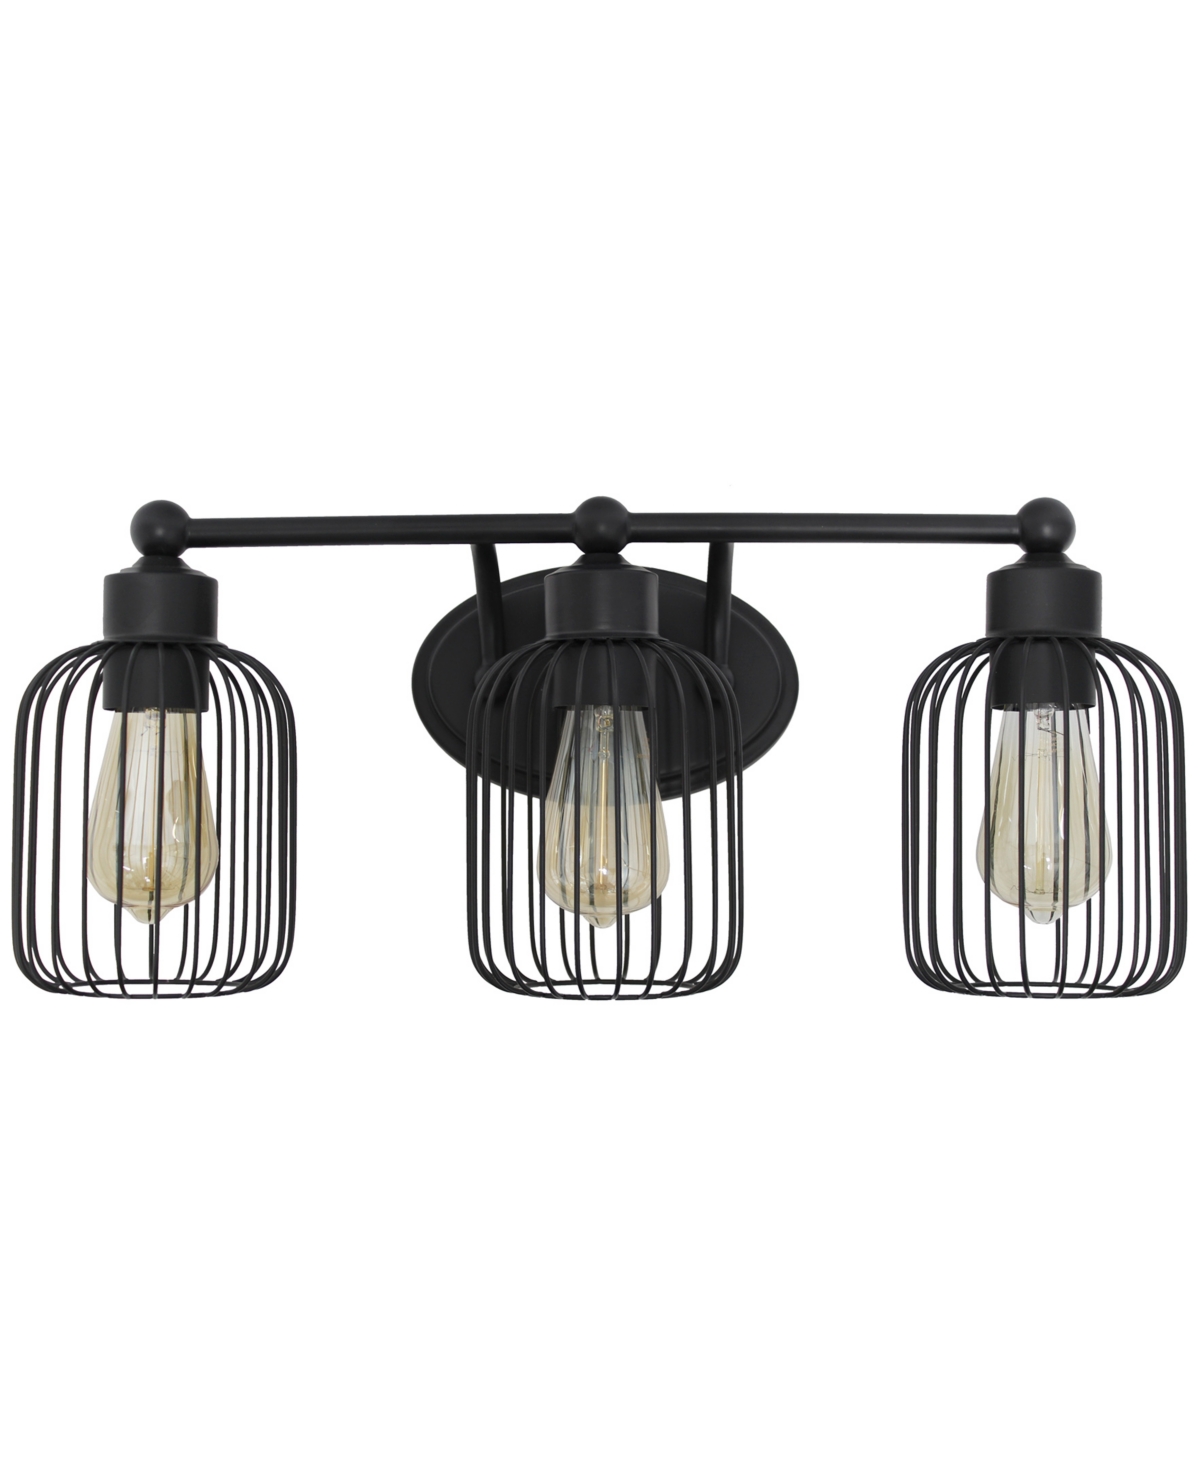 Shop Lalia Home Ironhouse Three Light Industrial Decorative Cage Vanity Uplight Downlight Wall Mounted Fixture F In Black